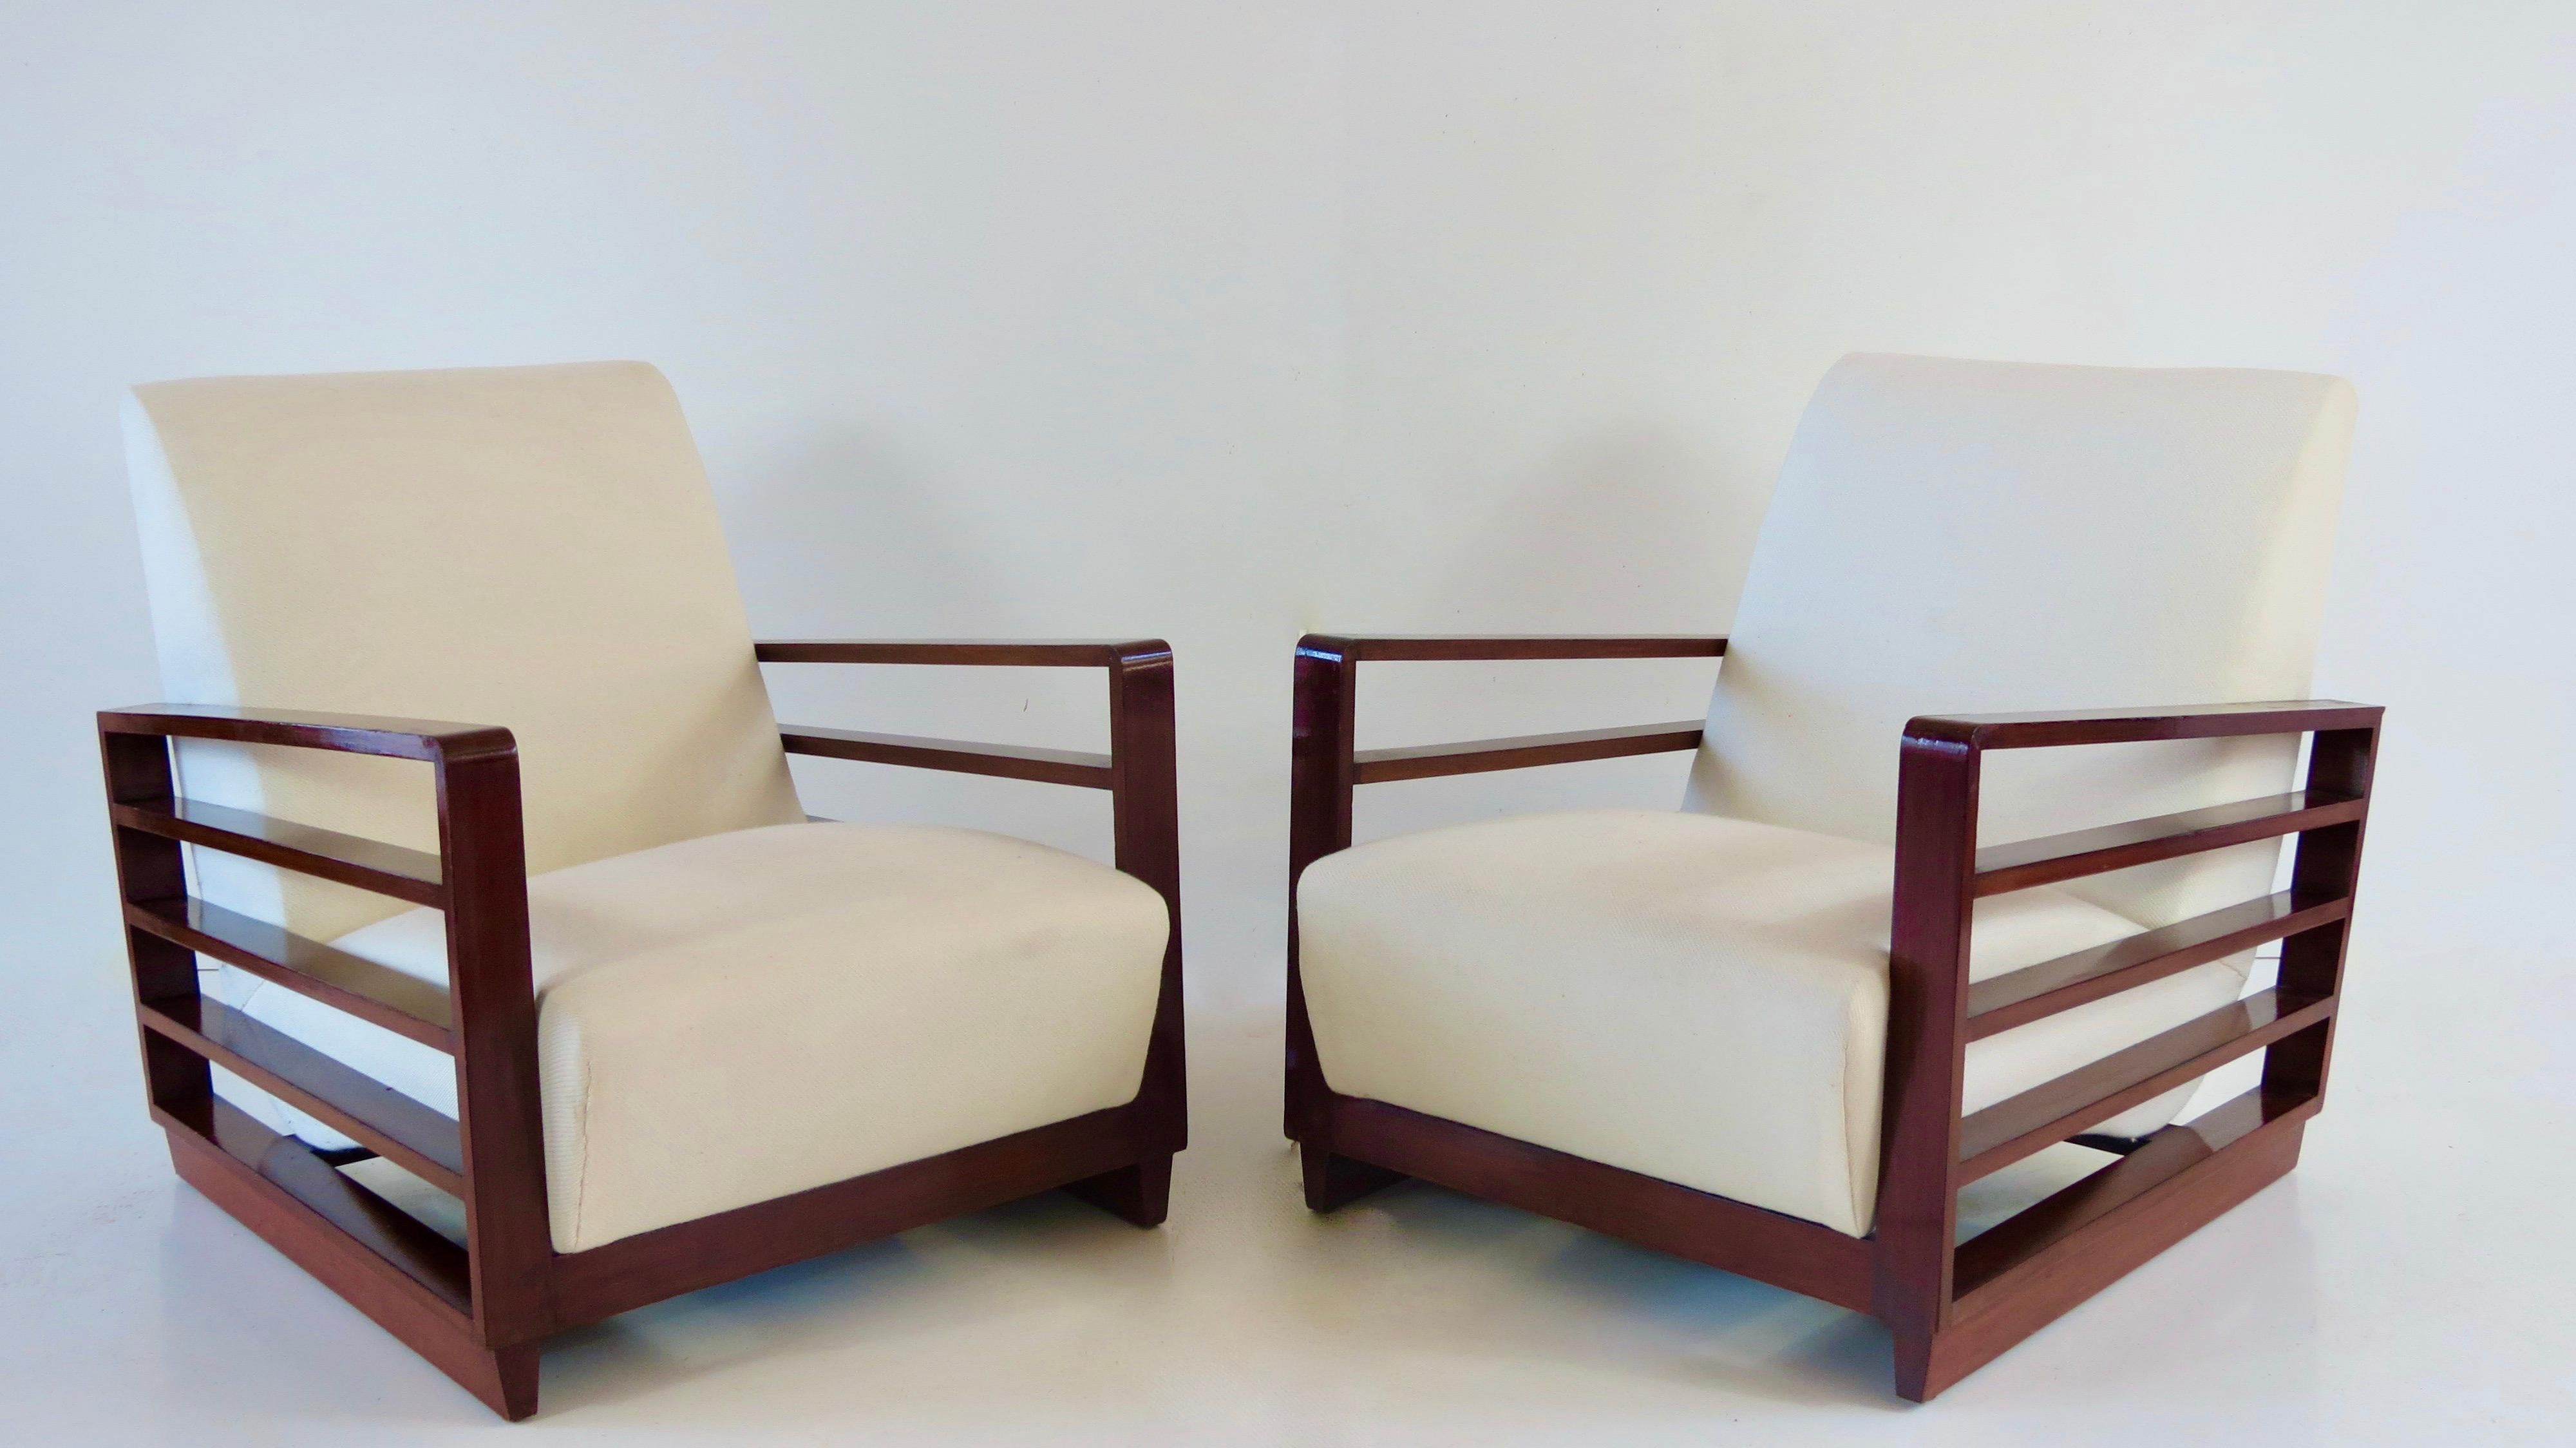 Fine Pair of Mario Quarti Rationalist Beech White Lounge Chairs, 1940 For Sale 3